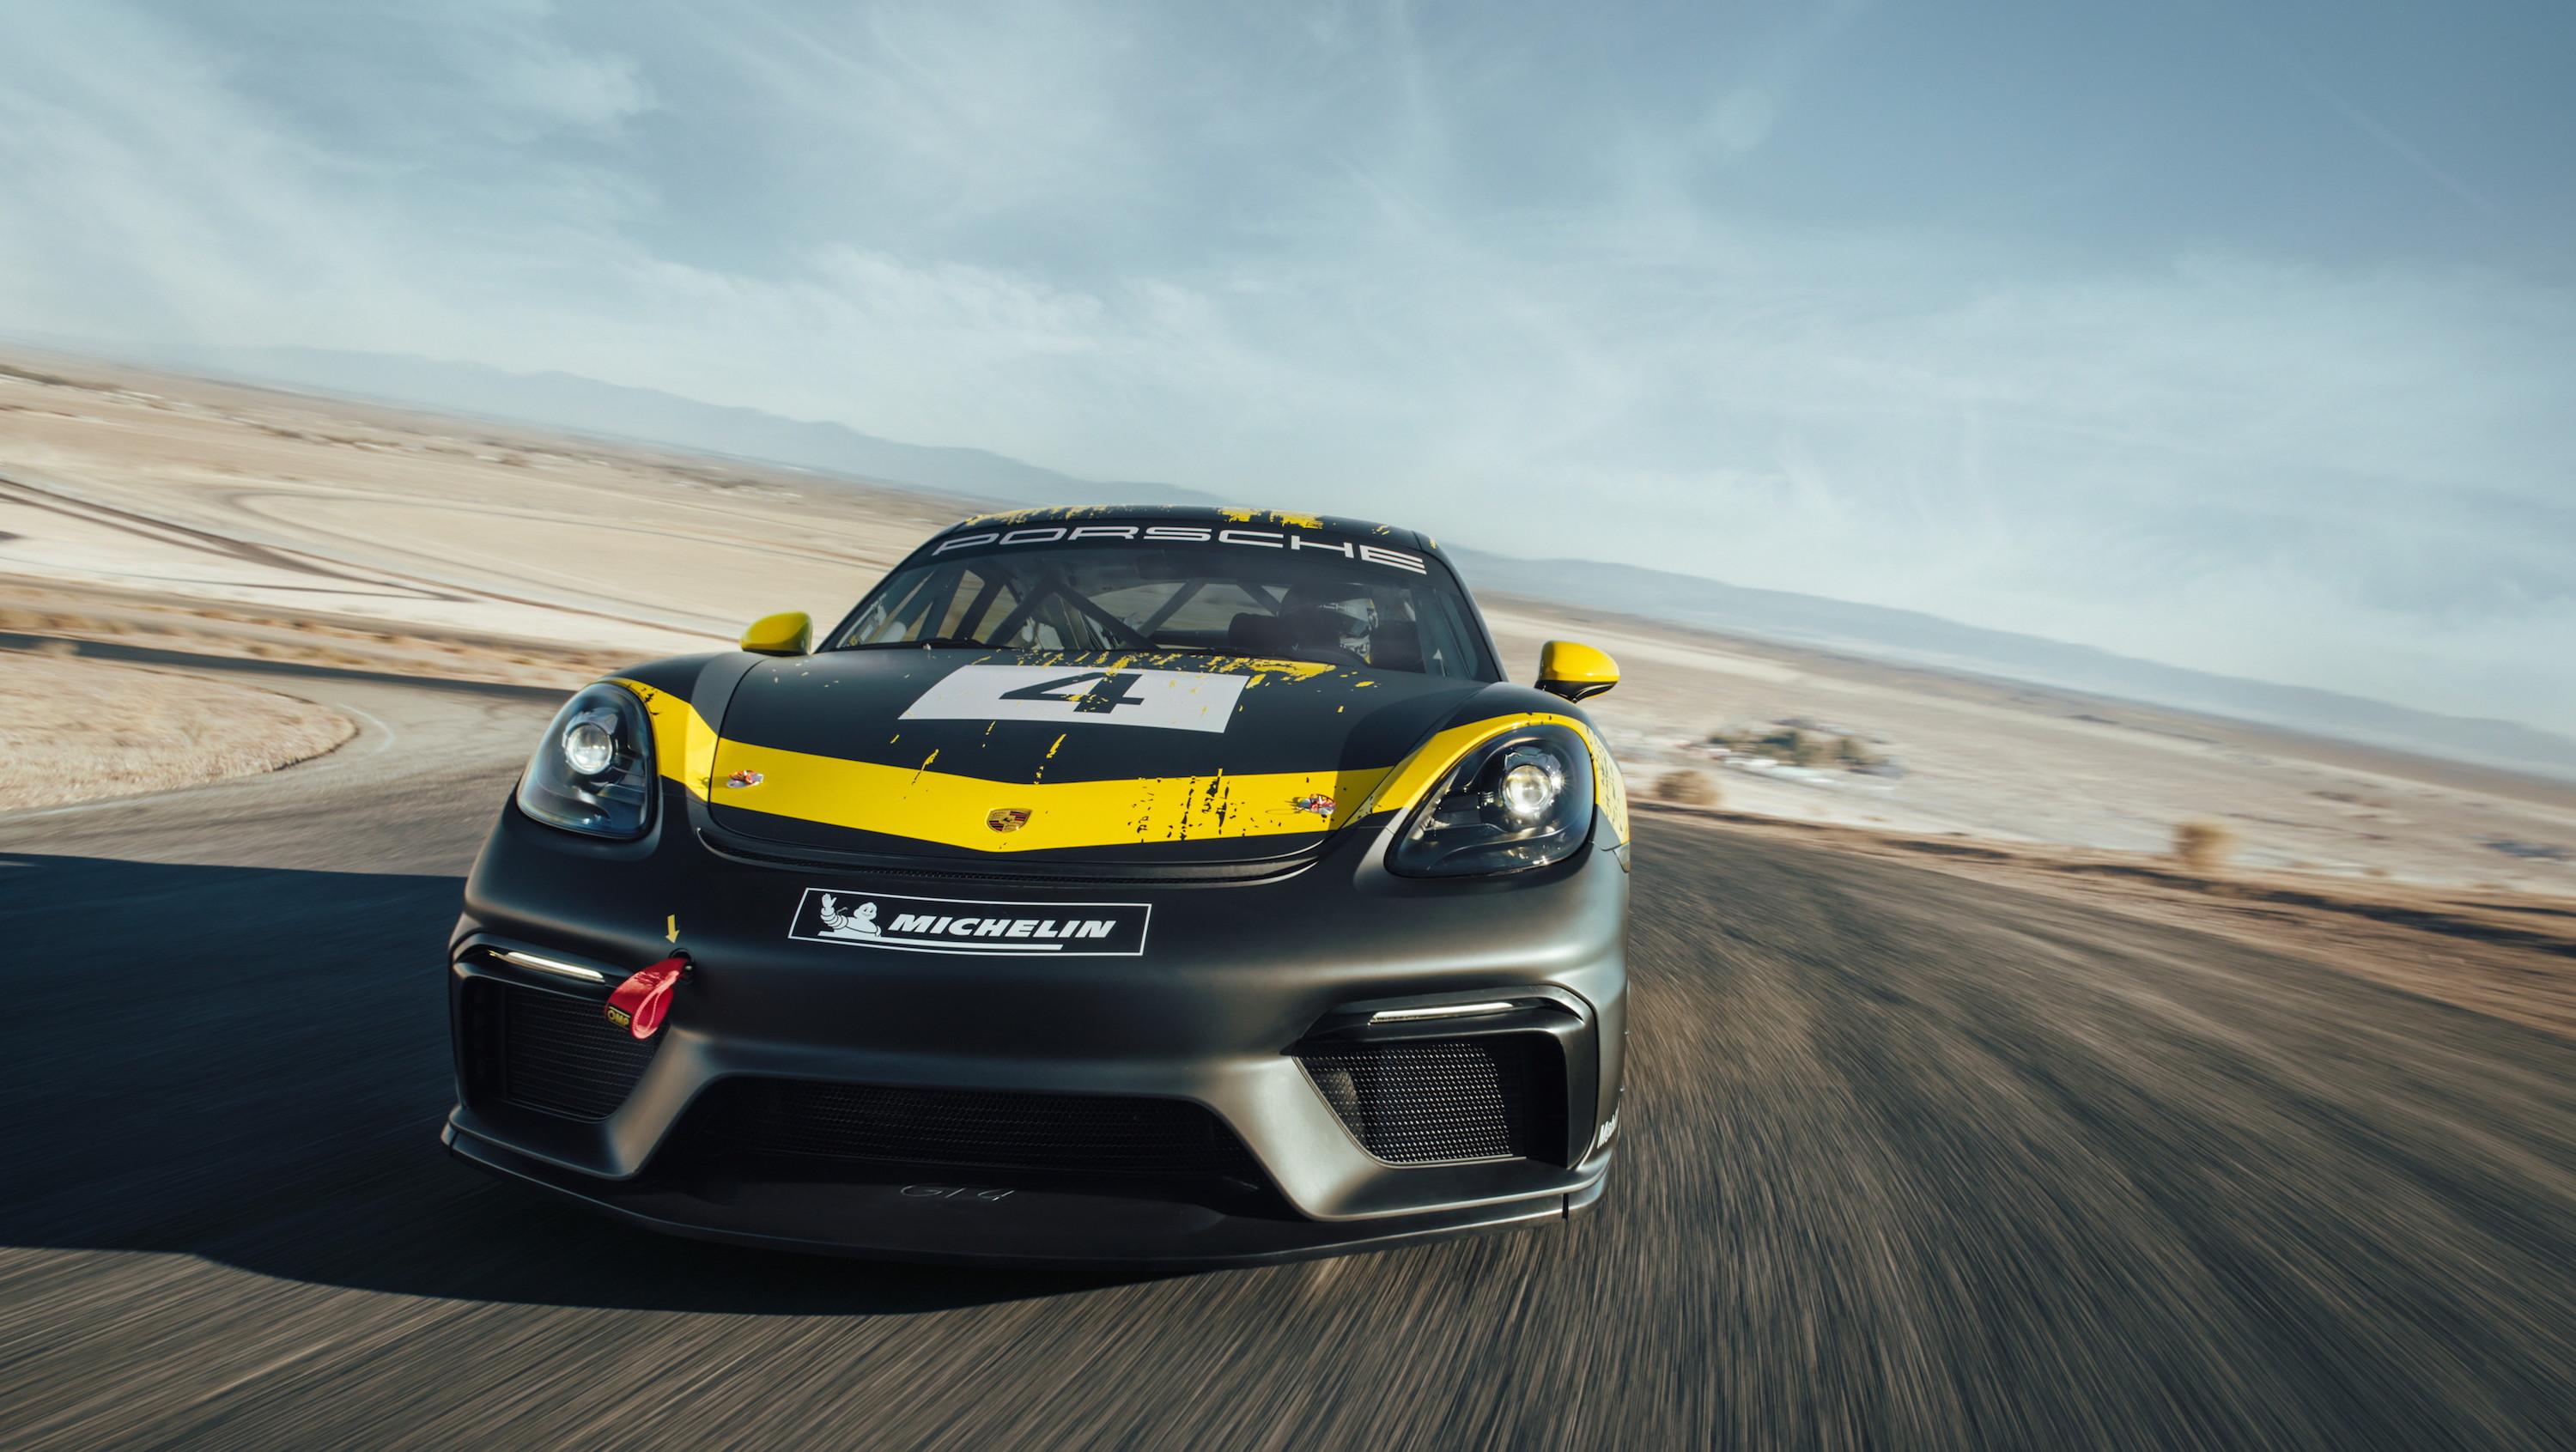 Introducing the Porsche 718 Cayman GT4 Sports Cup Edition